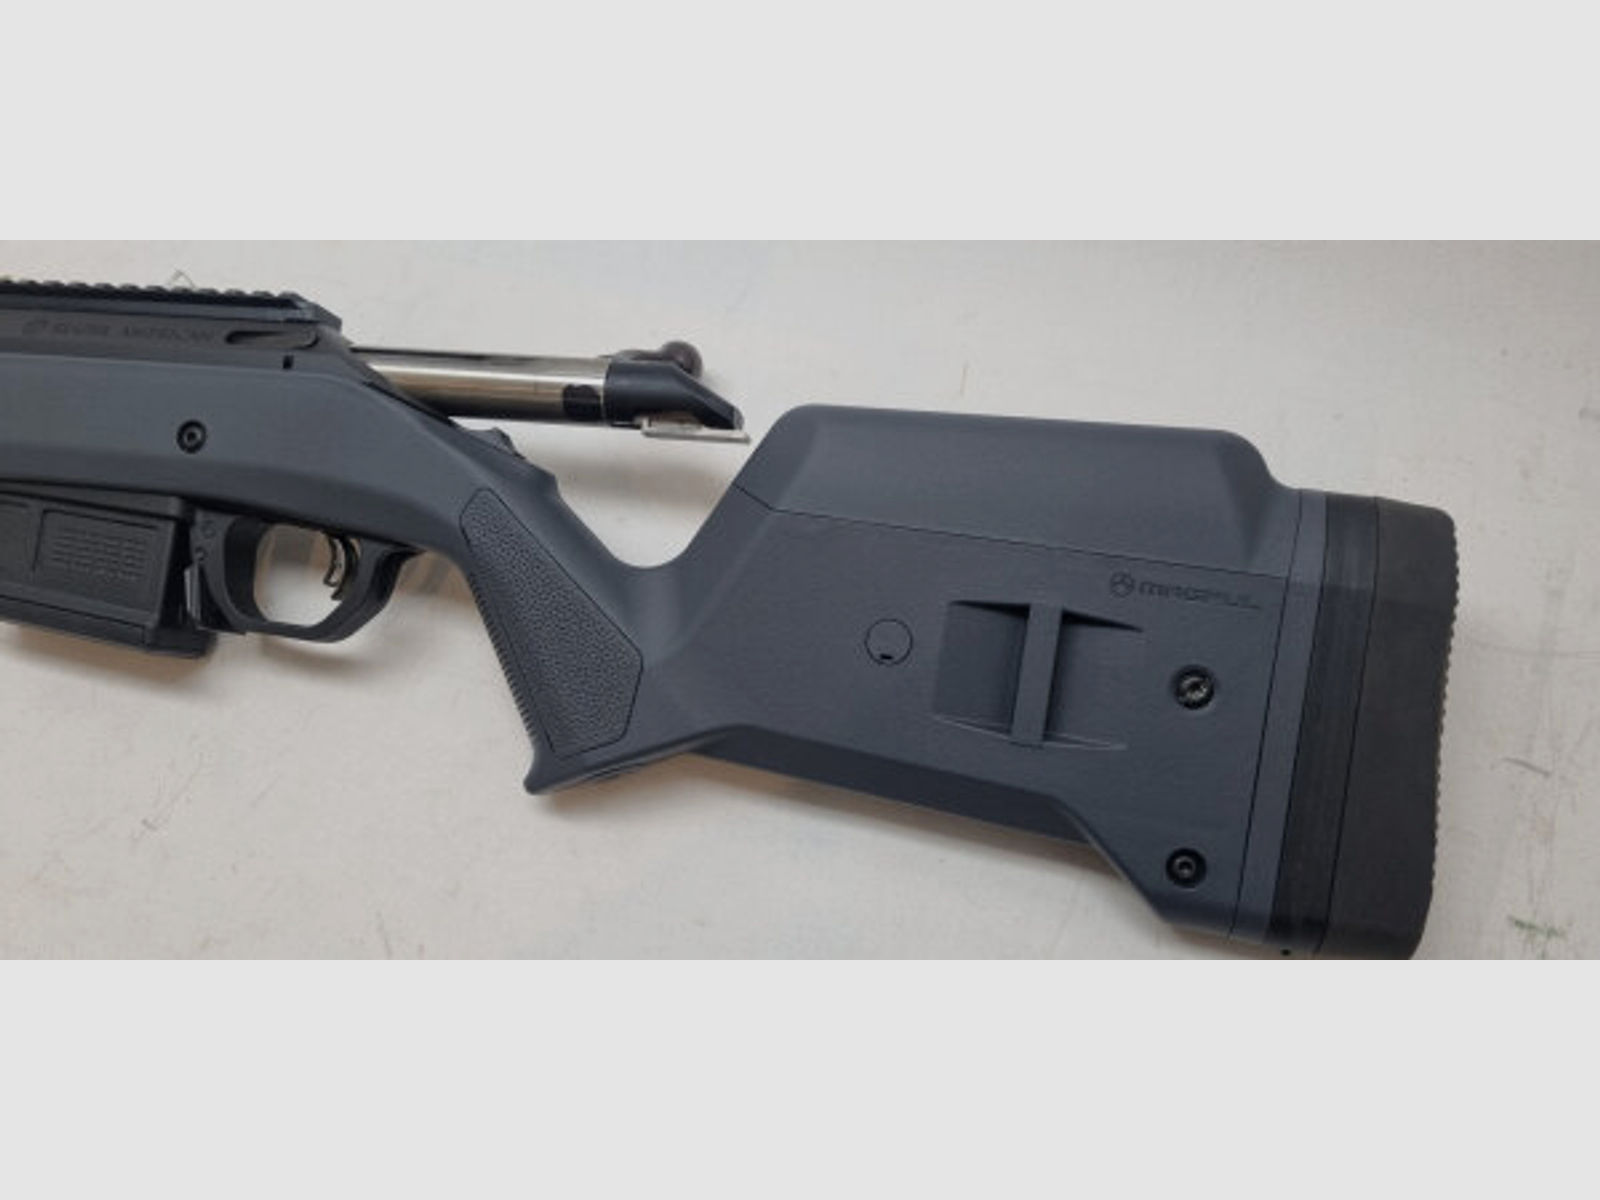 Repetierbüchse Ruger American Rifle Hunter Kal. .308Win Magpul Schaft